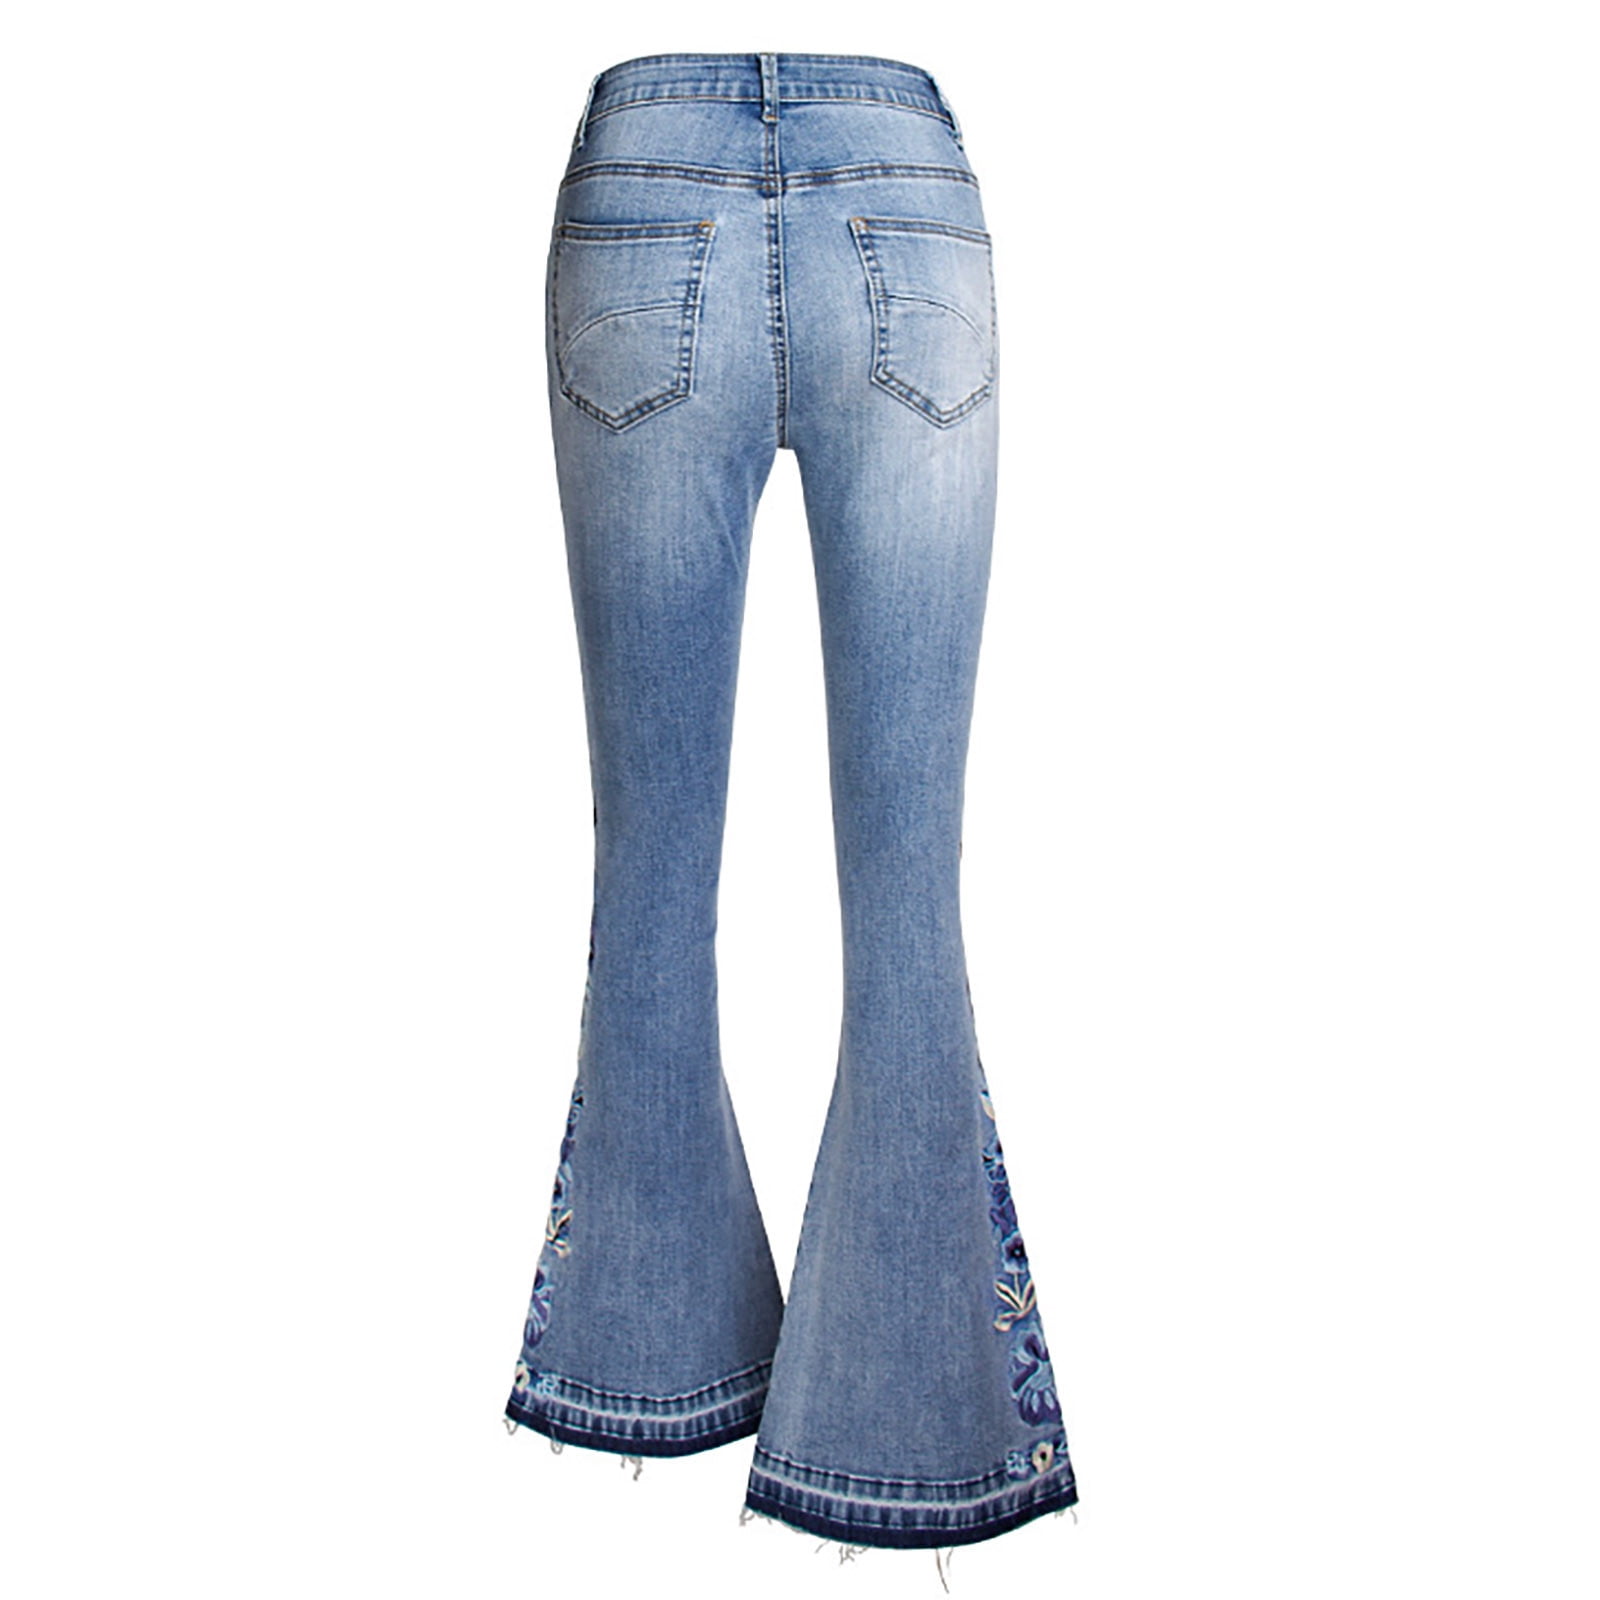 Women's Flared Jeans Stereoscopic 3D Fashion Vintage Classic ...